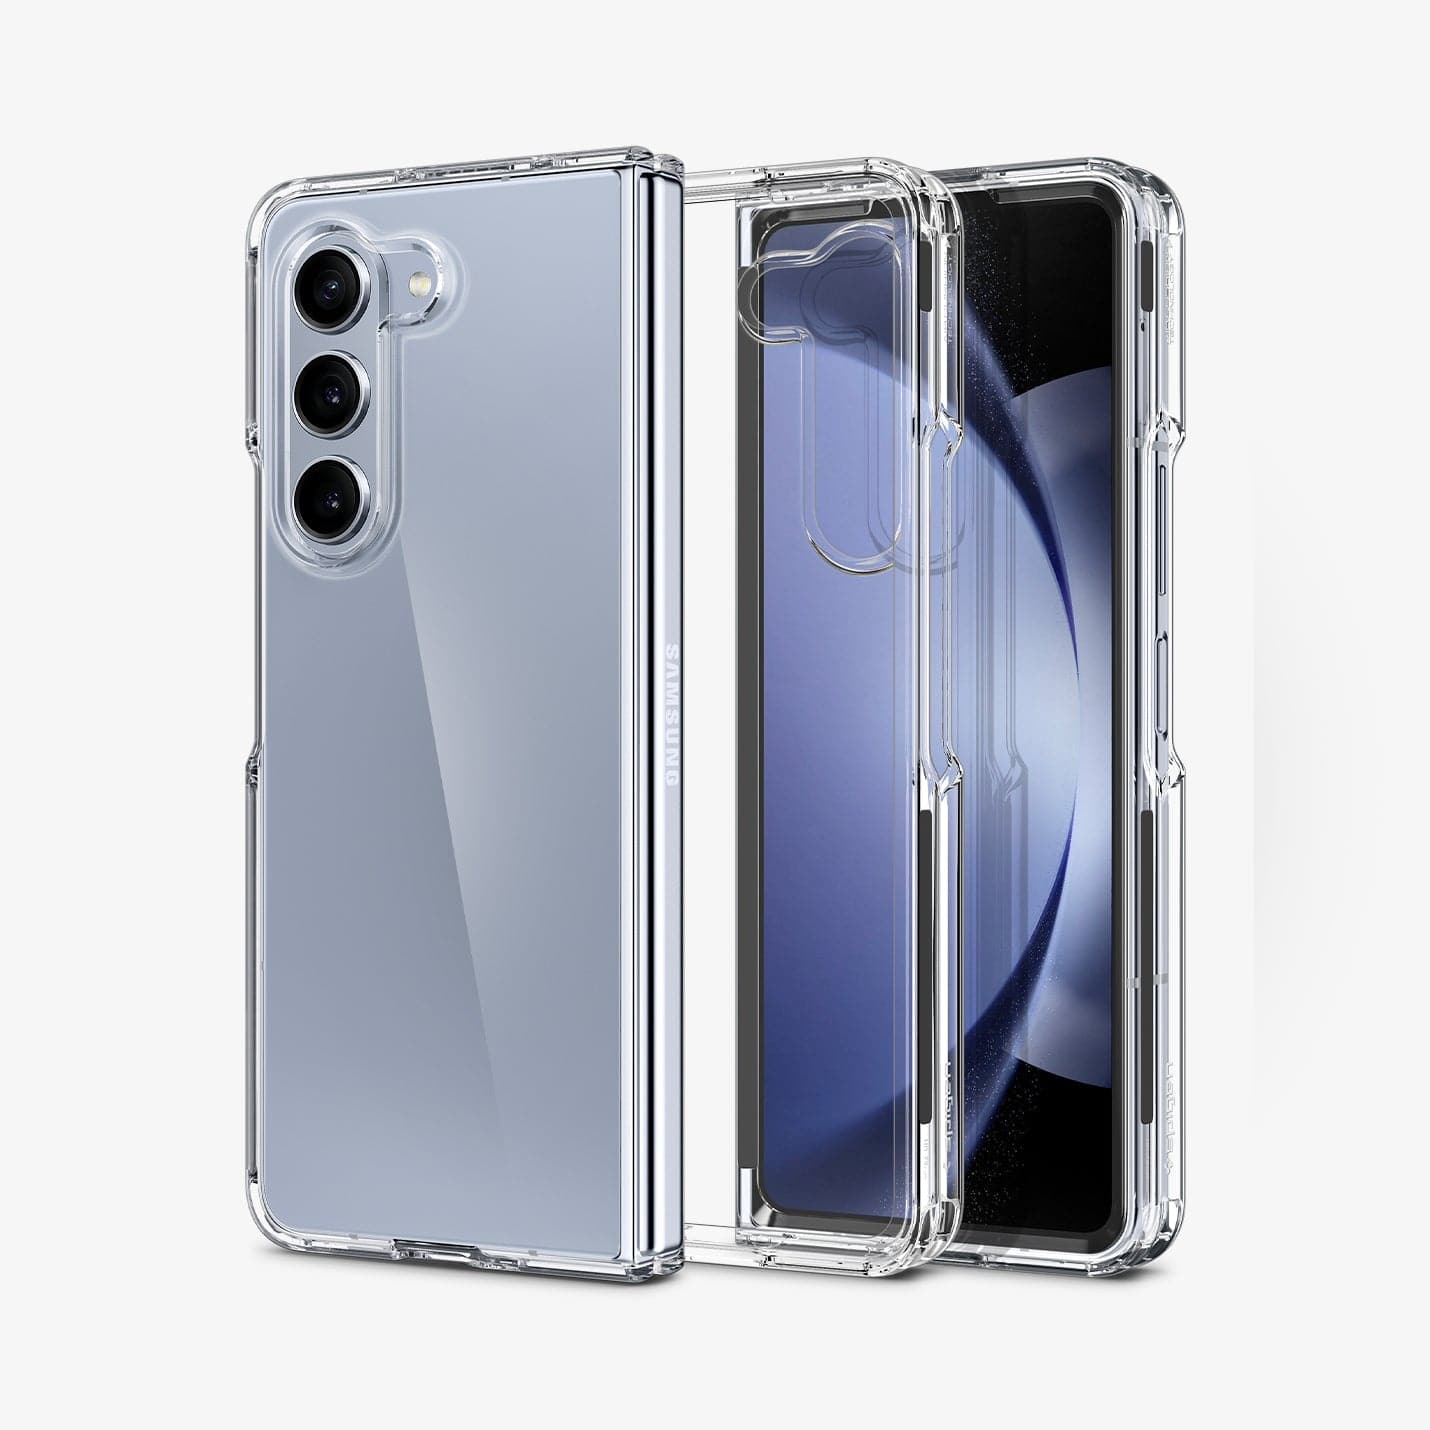 ACS06221 - Galaxy Z Fold 5 Case Ultra Hybrid in crystal clear showing the back, inside and front